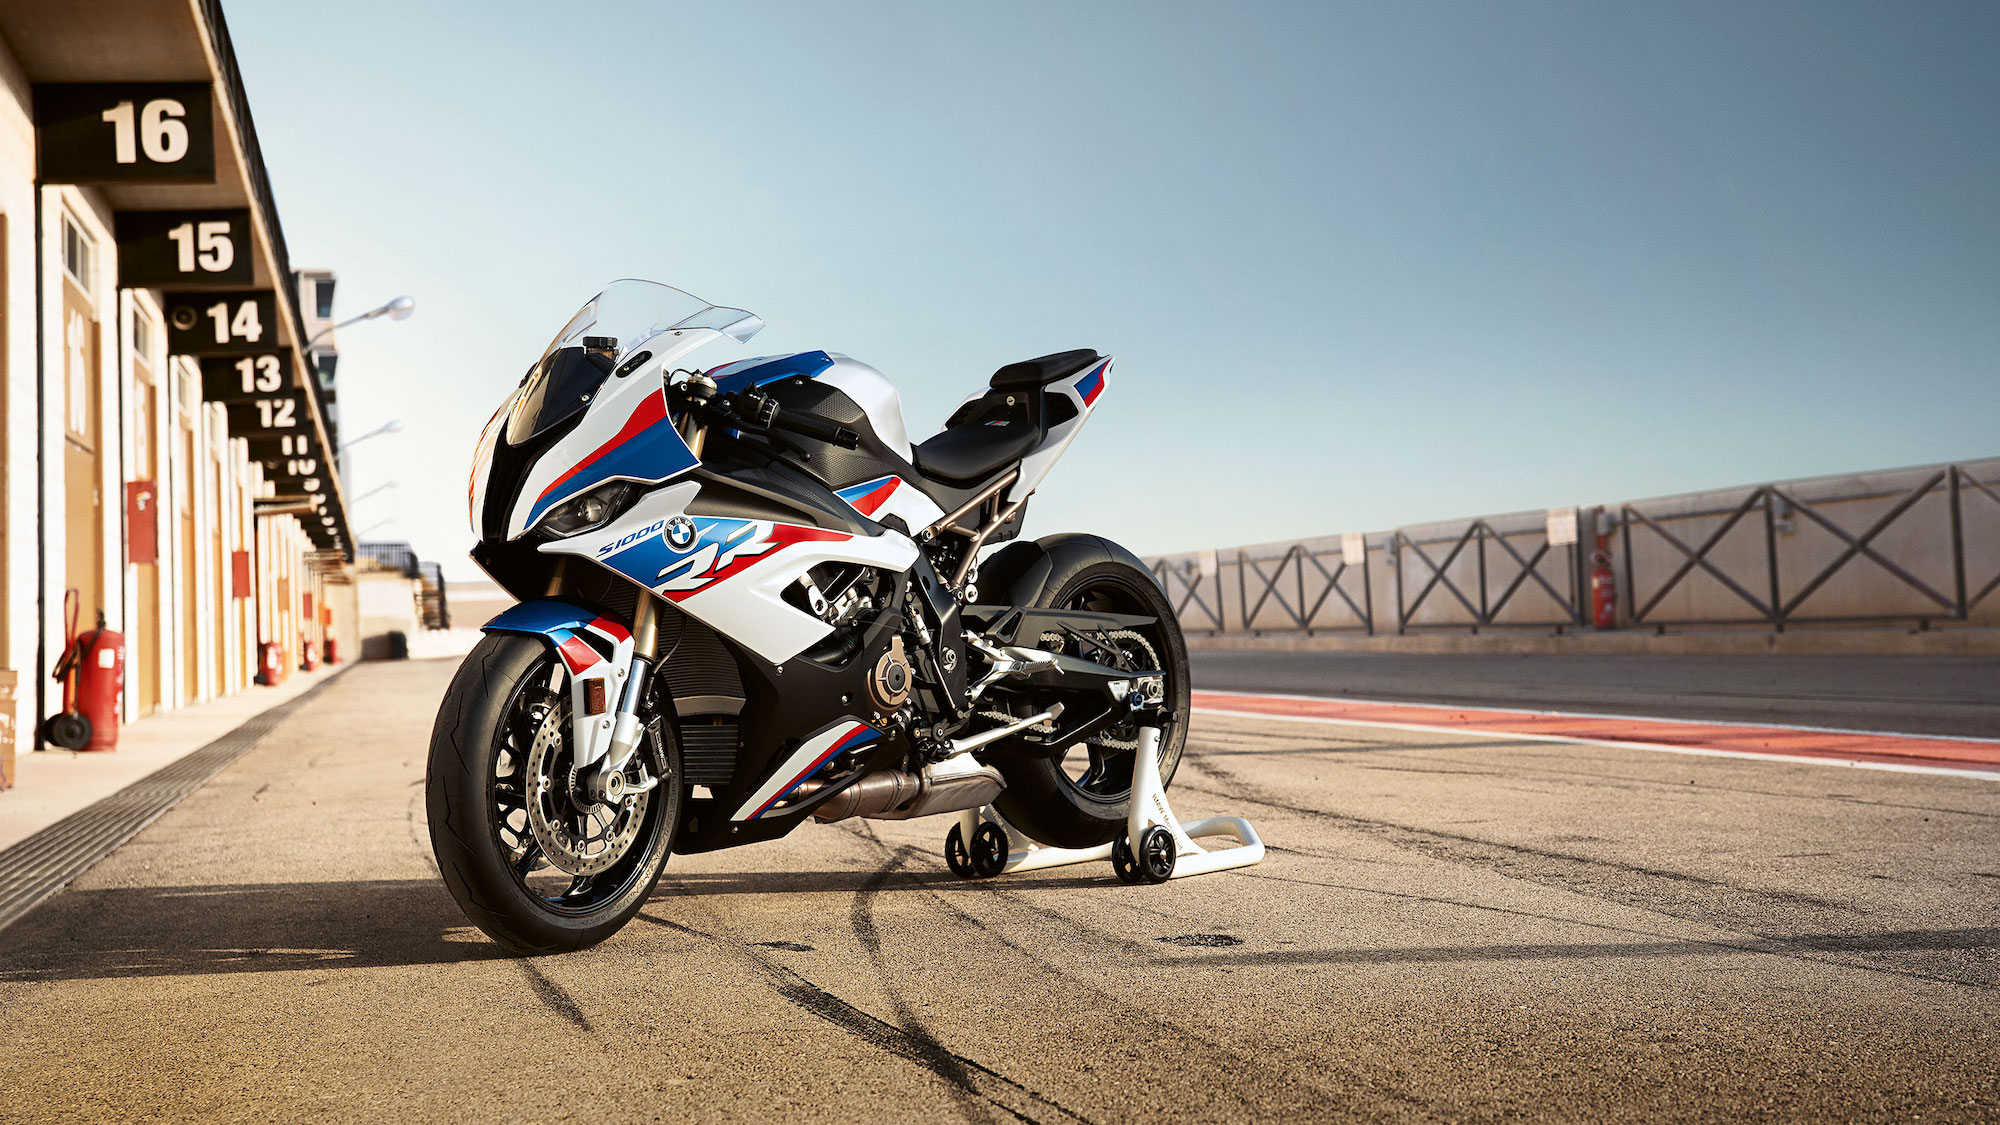 BMW's S 1000 RR. Media sourced from BMW.